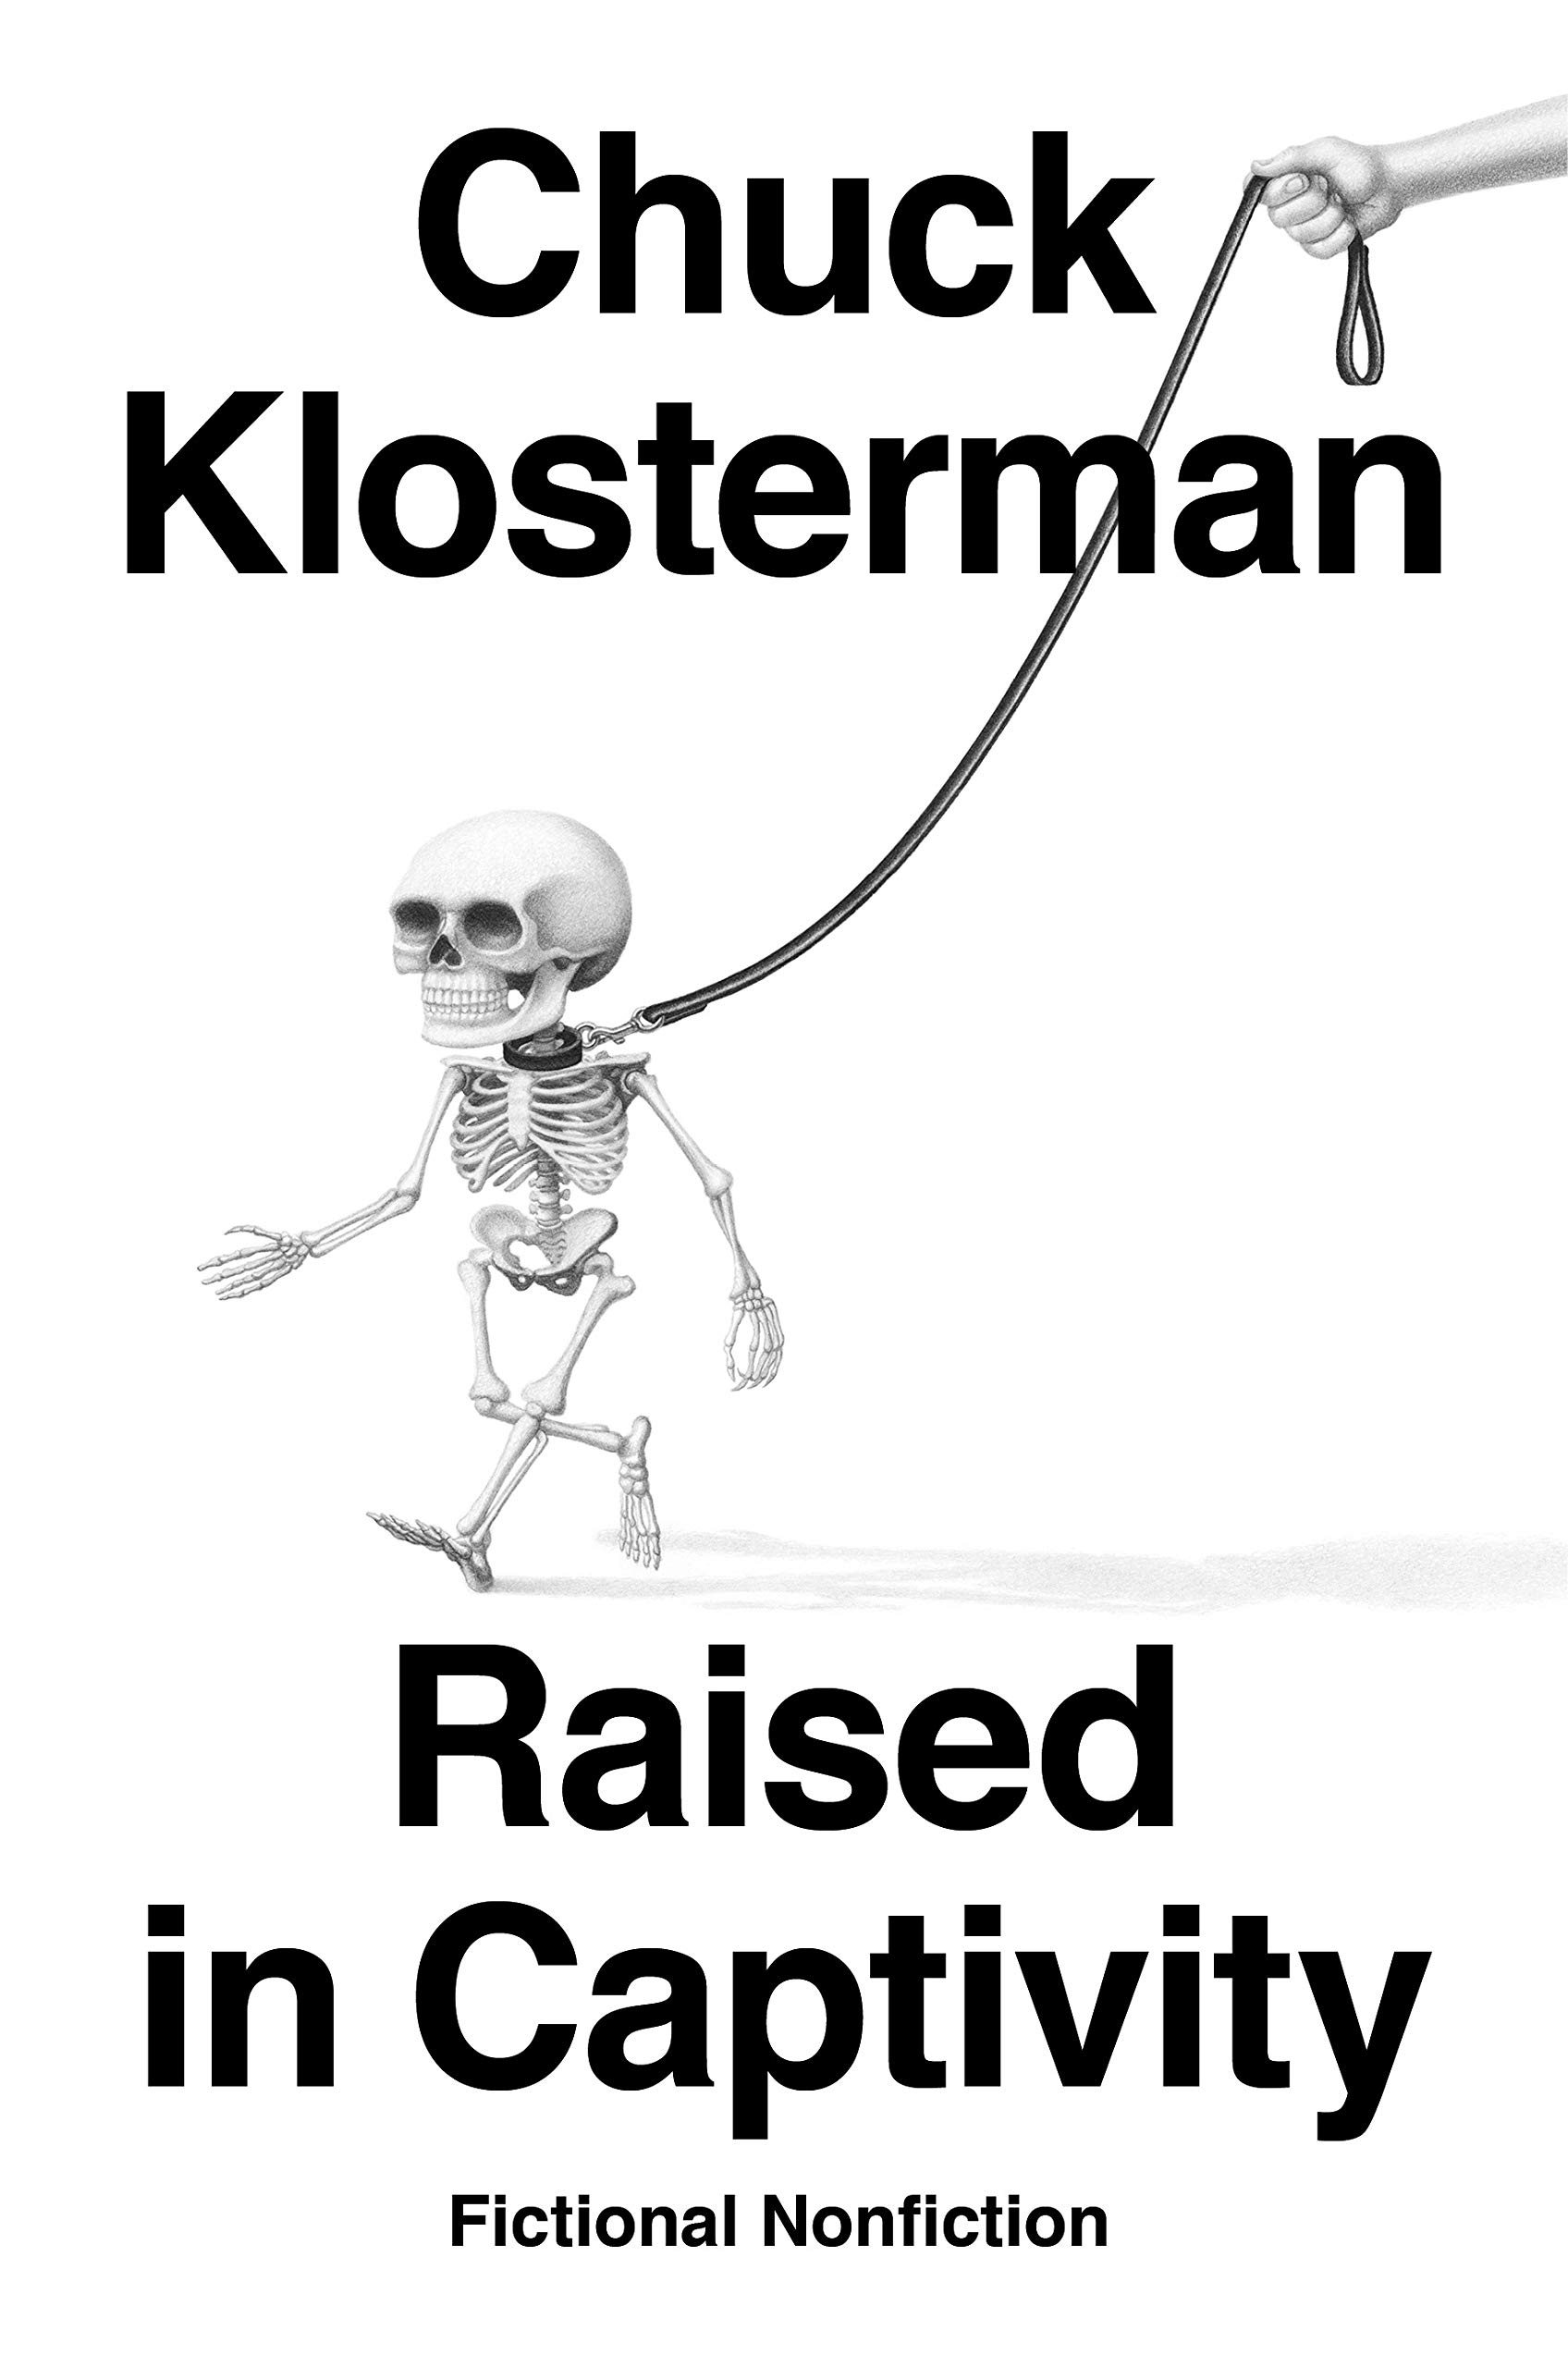 A monochrome book cover featuring the title "raised in captivity" by chuck klosterman, depicted with a whimsical illustration of a human skeleton being held up by a hand with a leash as if it were a puppet or a marionette. the subtitle "fictional nonfiction" gives a hint to the genre-bending nature of the content.